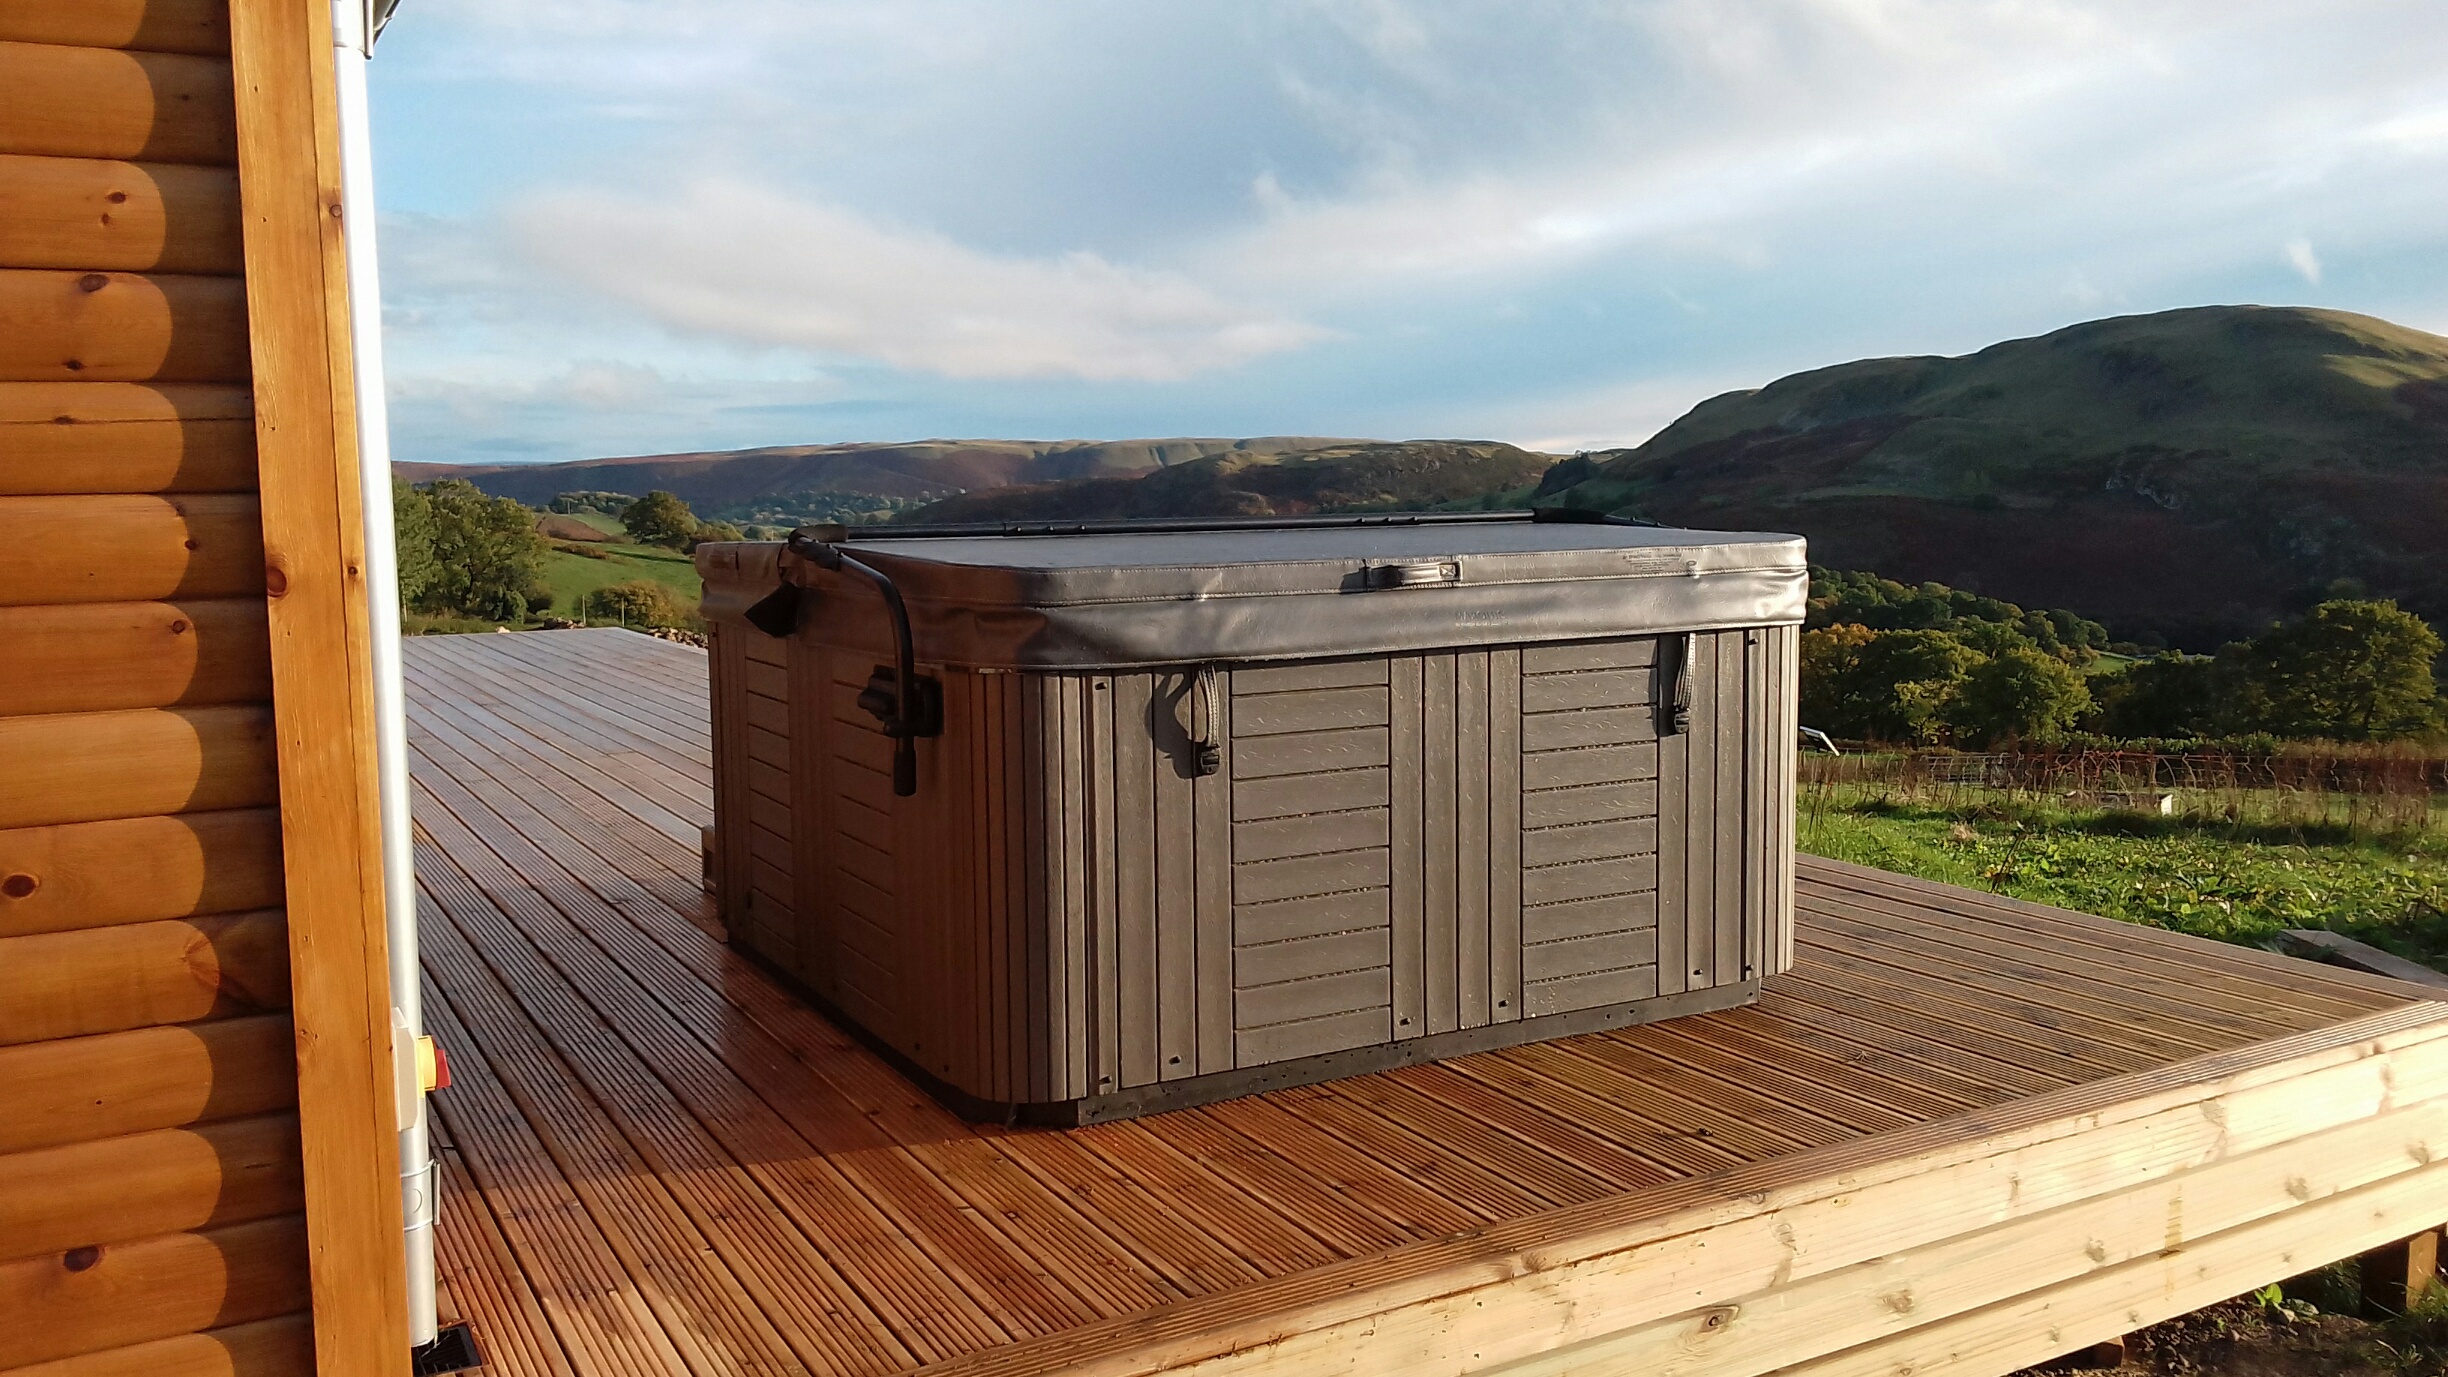 Marquis Spas Celebrity Broadway Hot Tub on a decking with cover closed